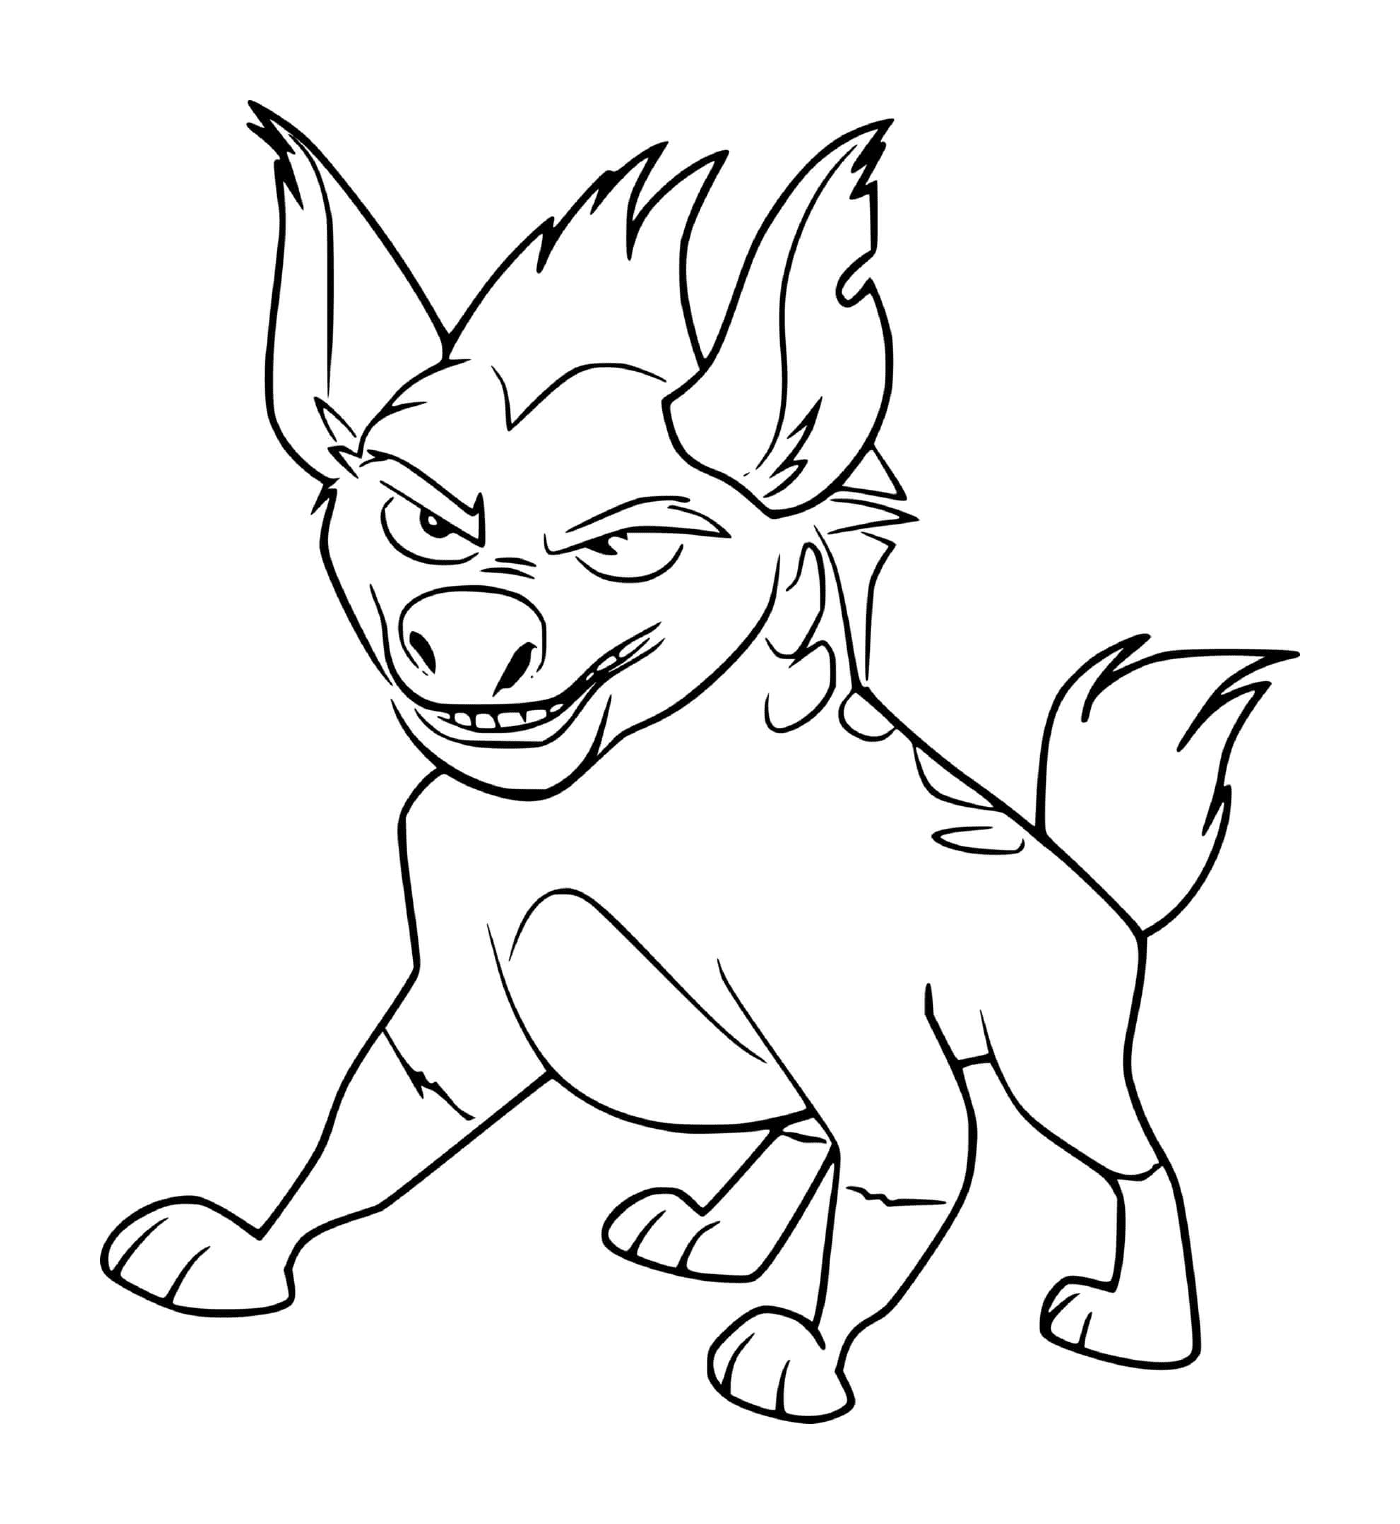  Janja, the hyena with a bright smile 